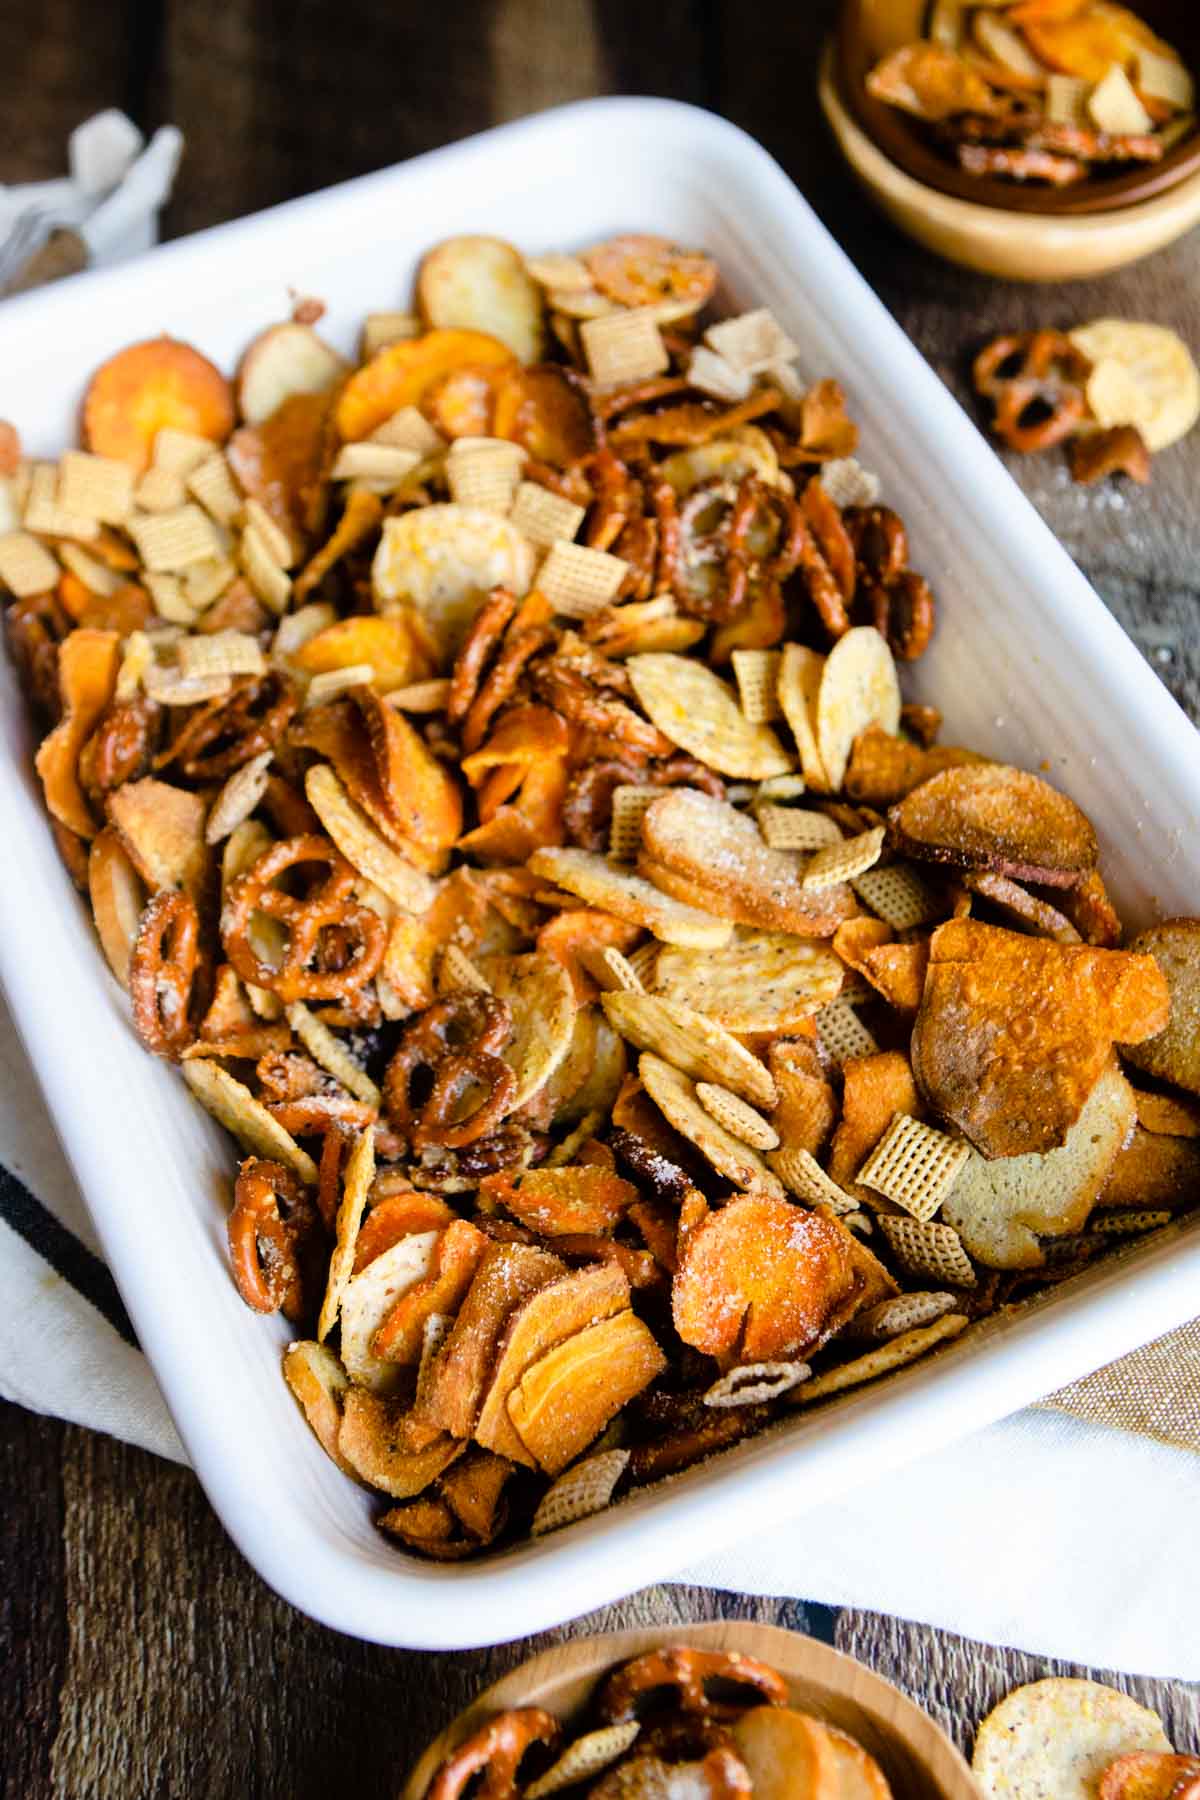 Homemade Chex Mix Recipe with Bold Flavors - These Old Cookbooks